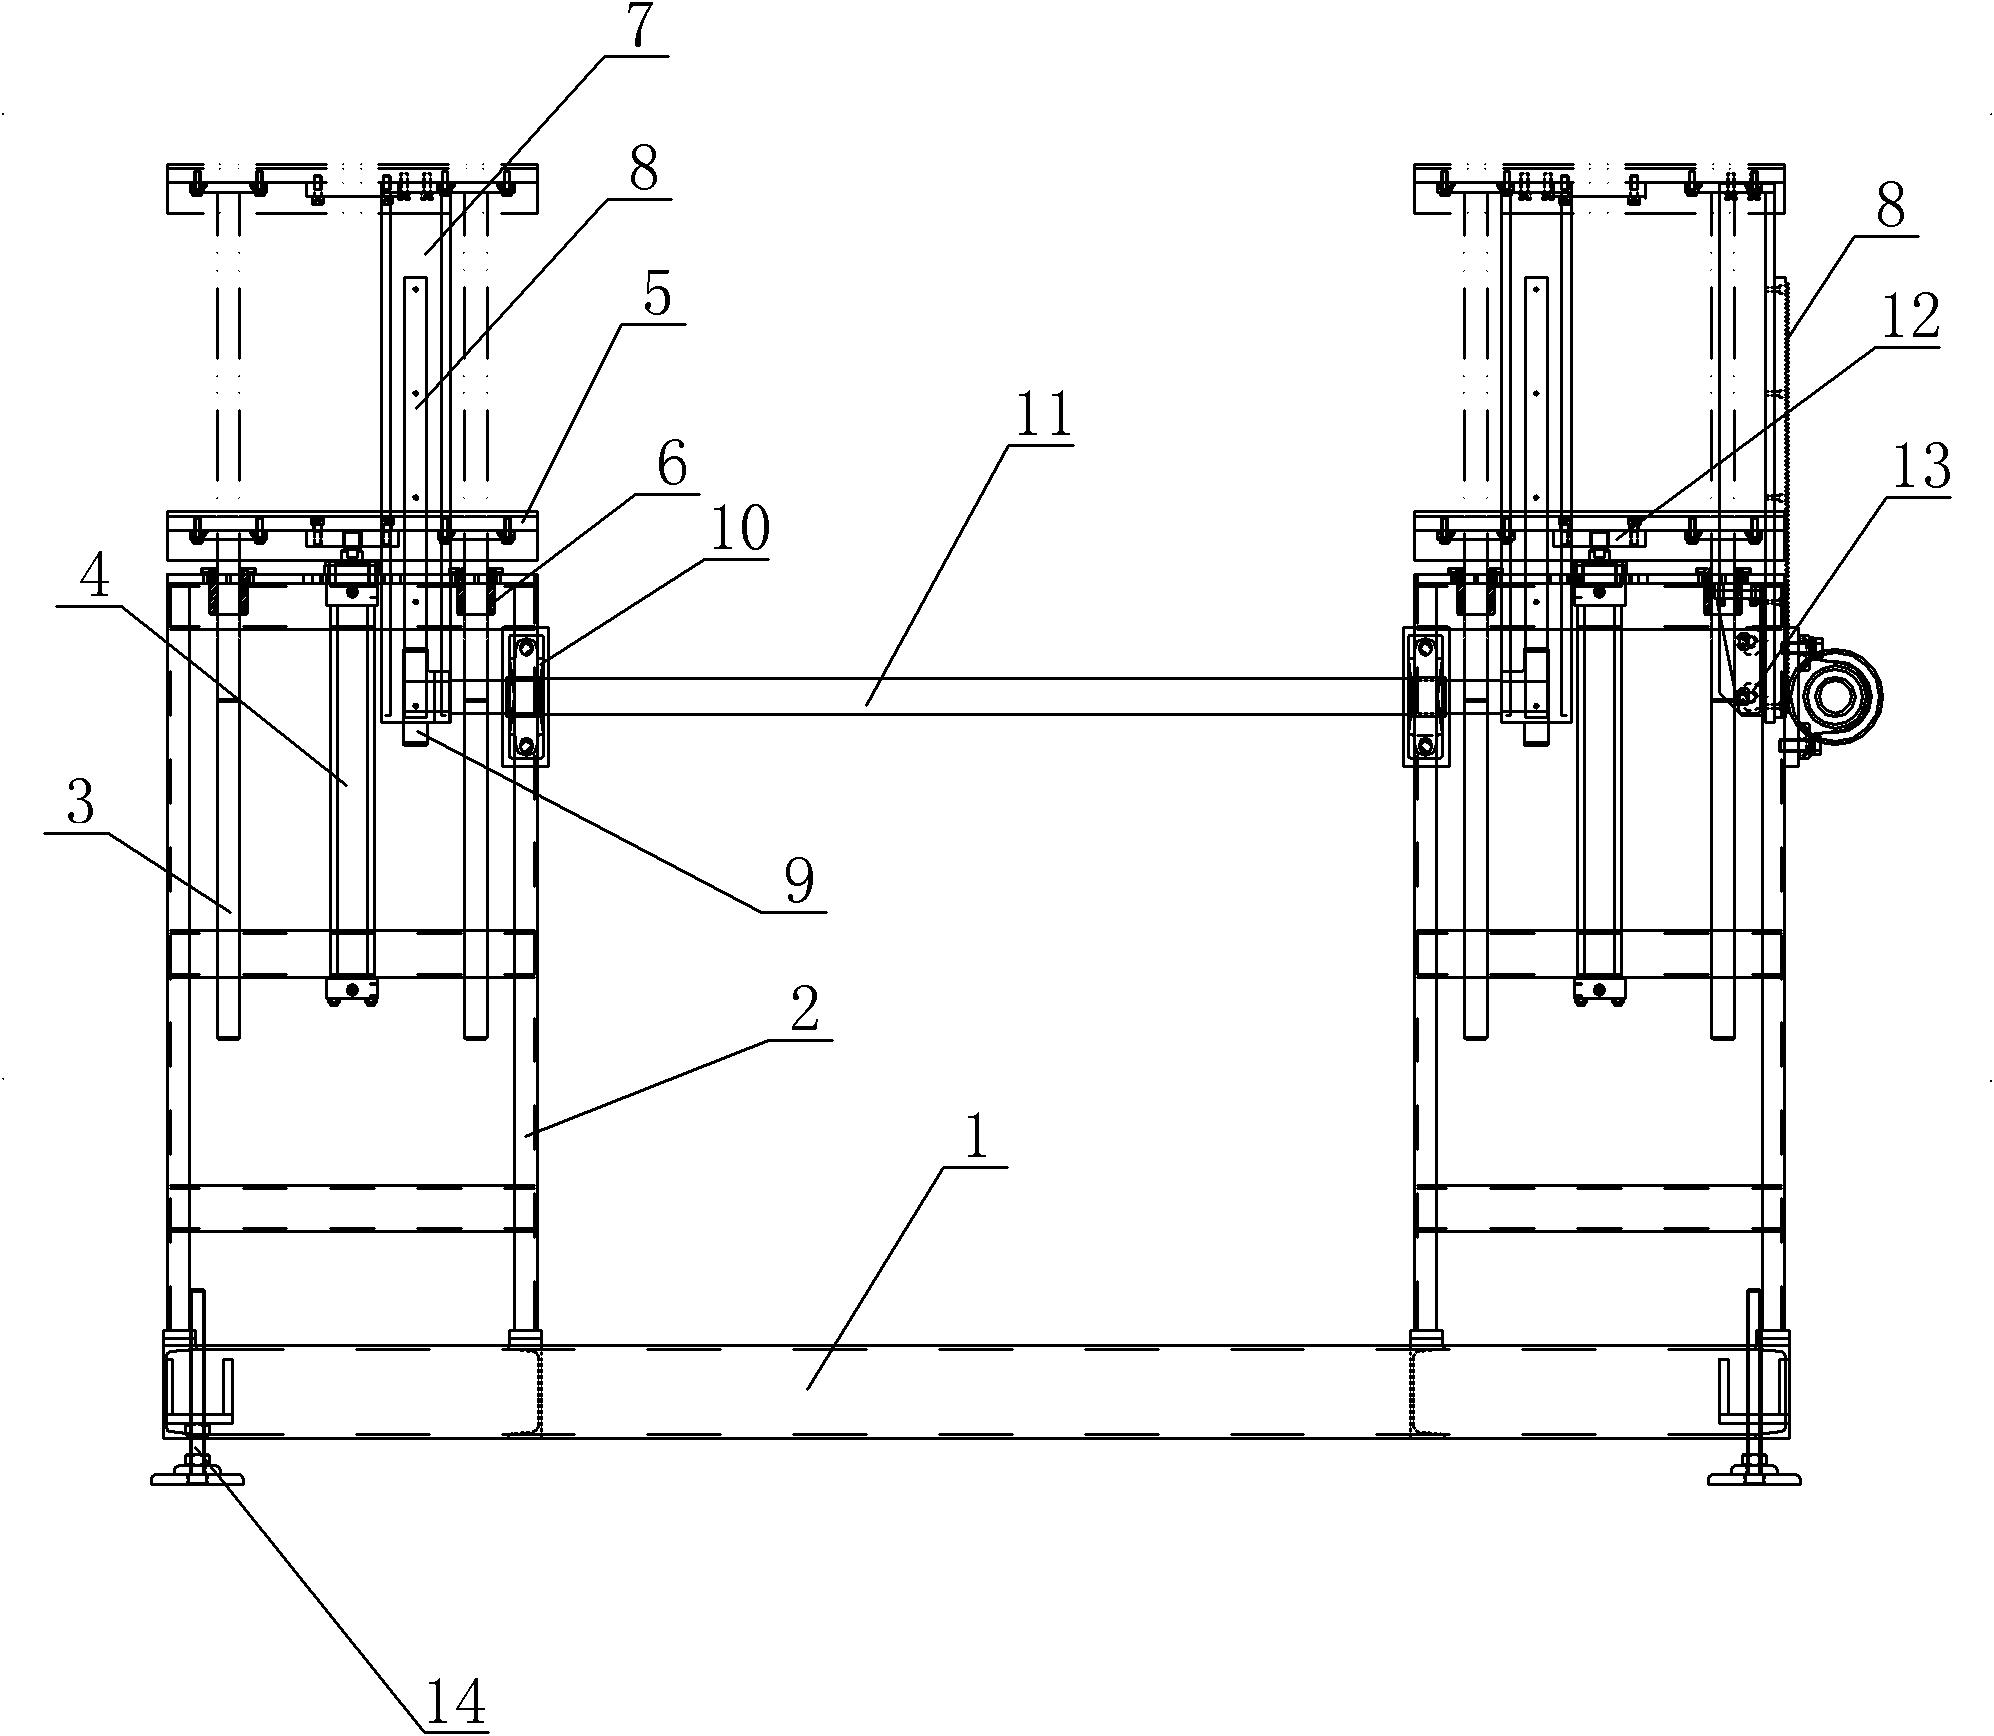 Synchronous lifting platform with four columns